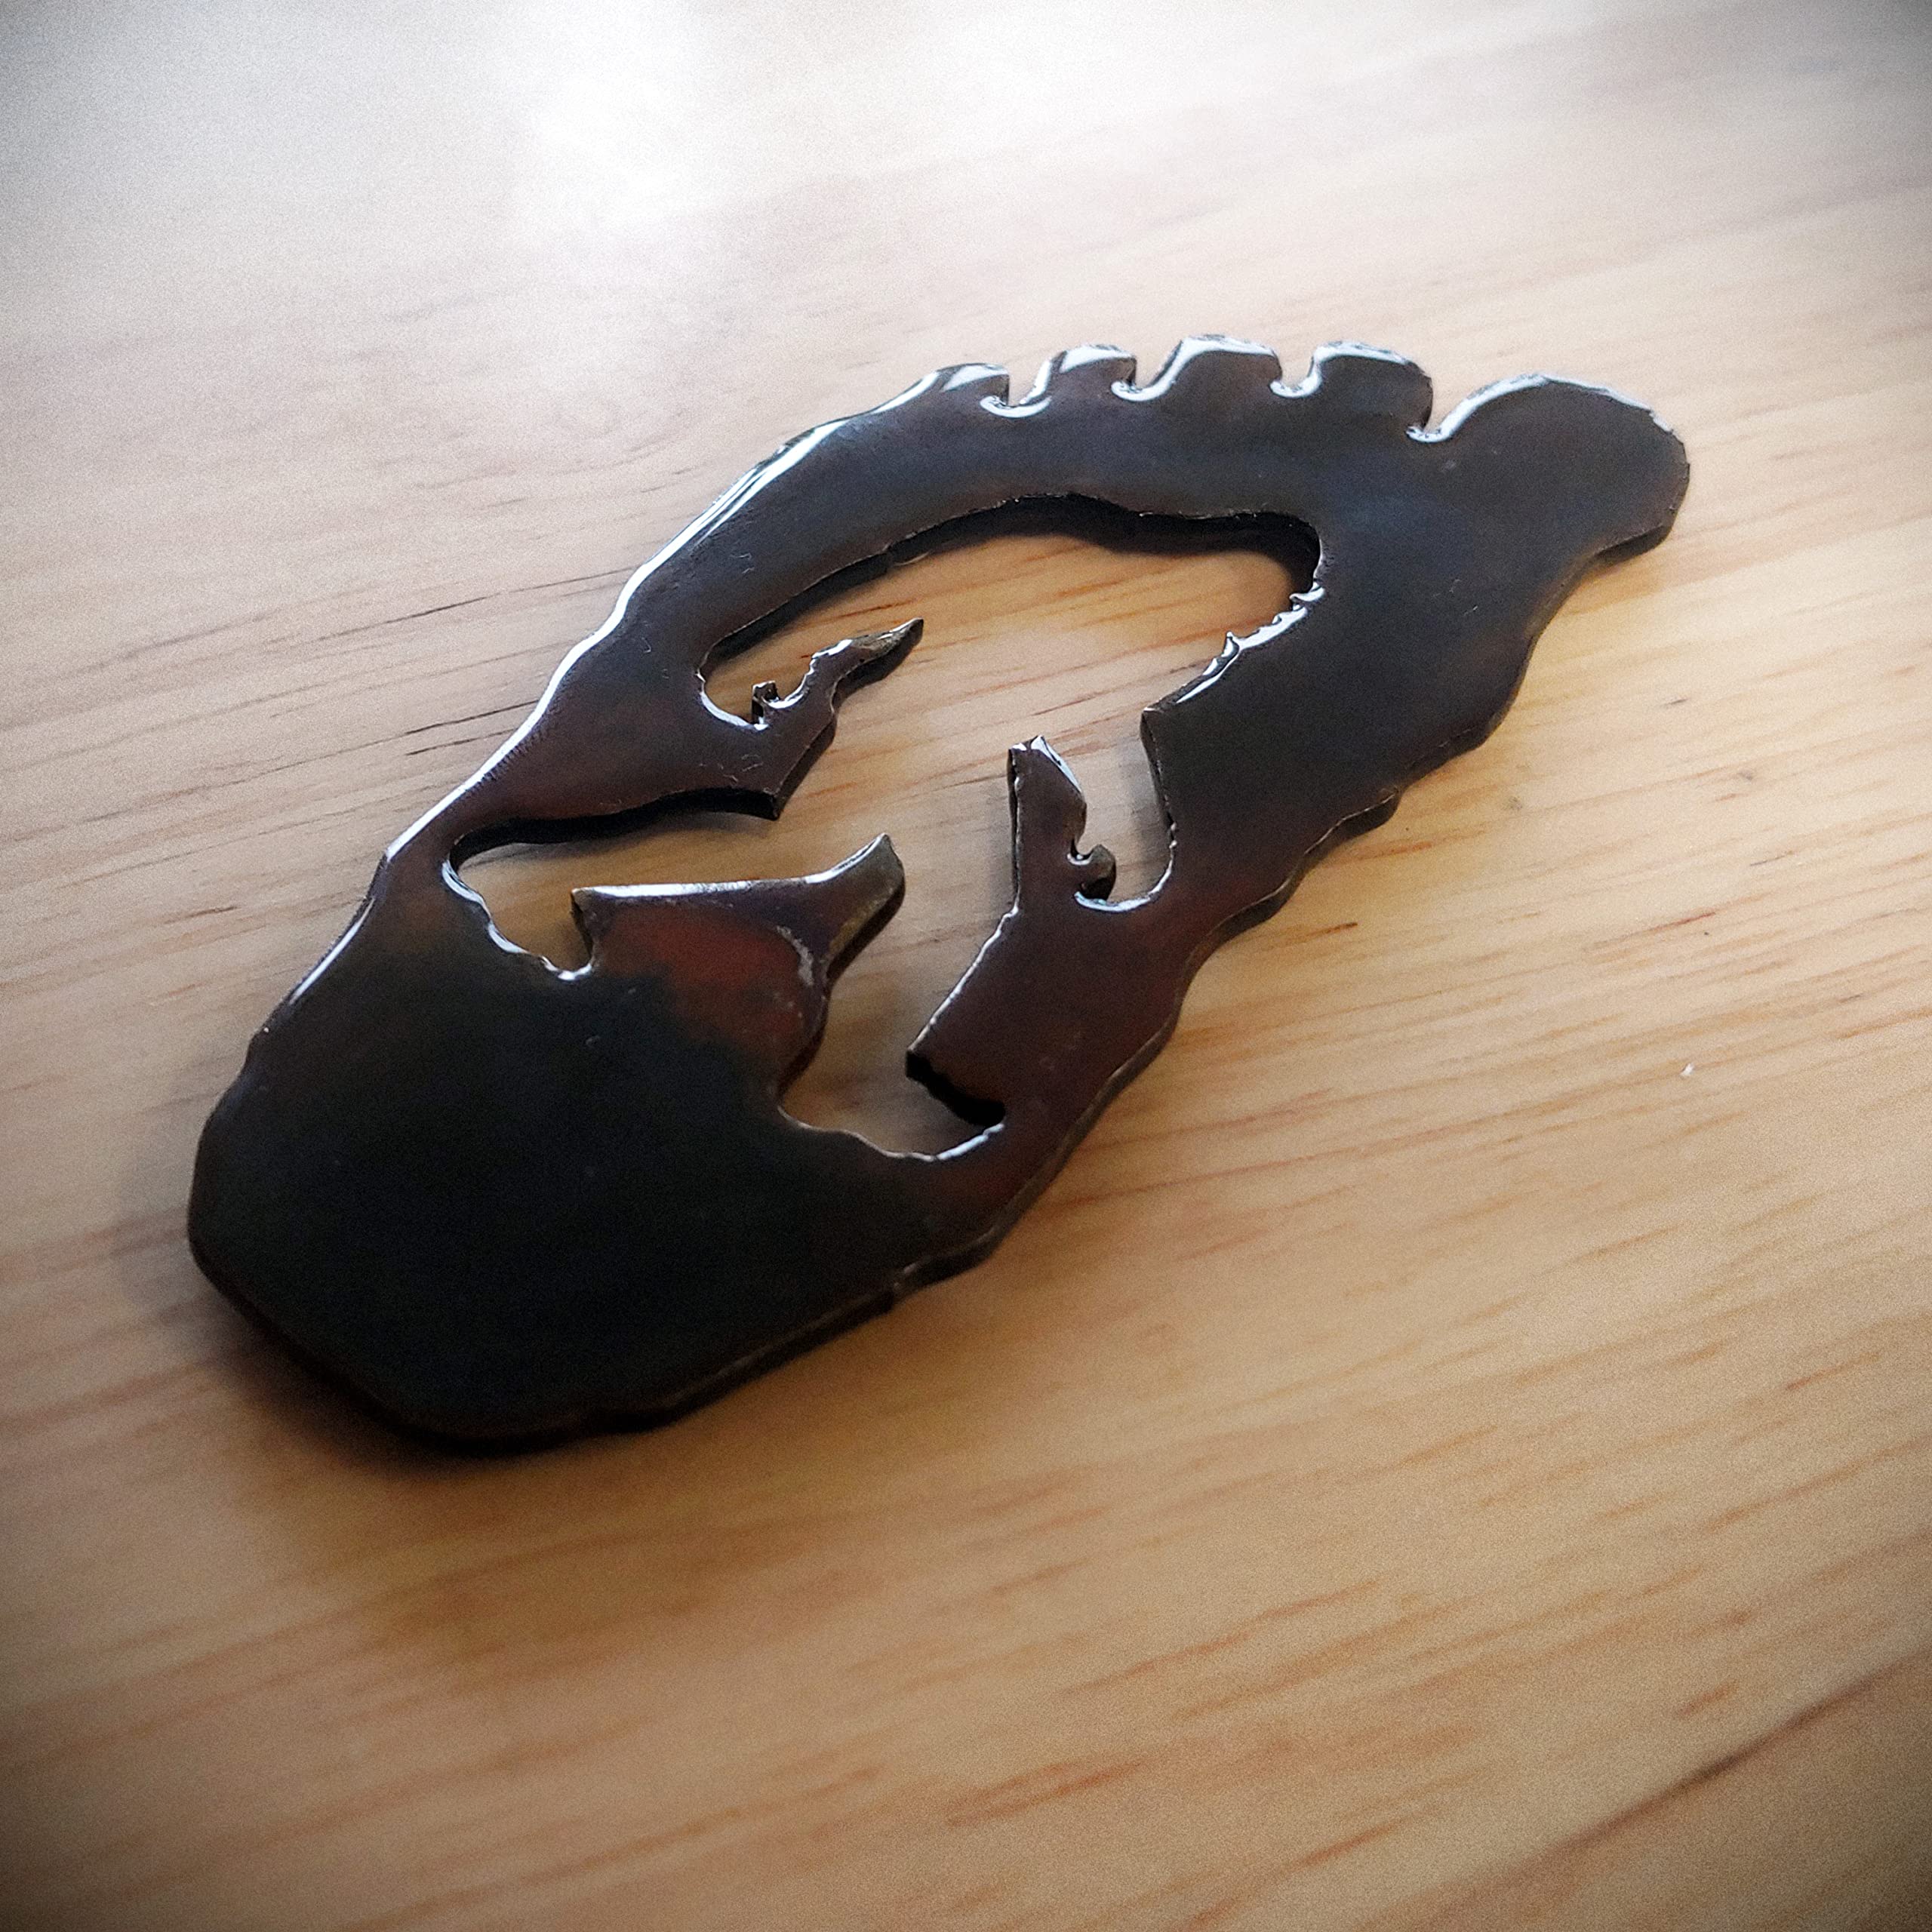 Bigfoot Gift - Footprint Magnet (Small) - Great Gift for Sasquatch Fans, Hiking, Outdoors, Camping